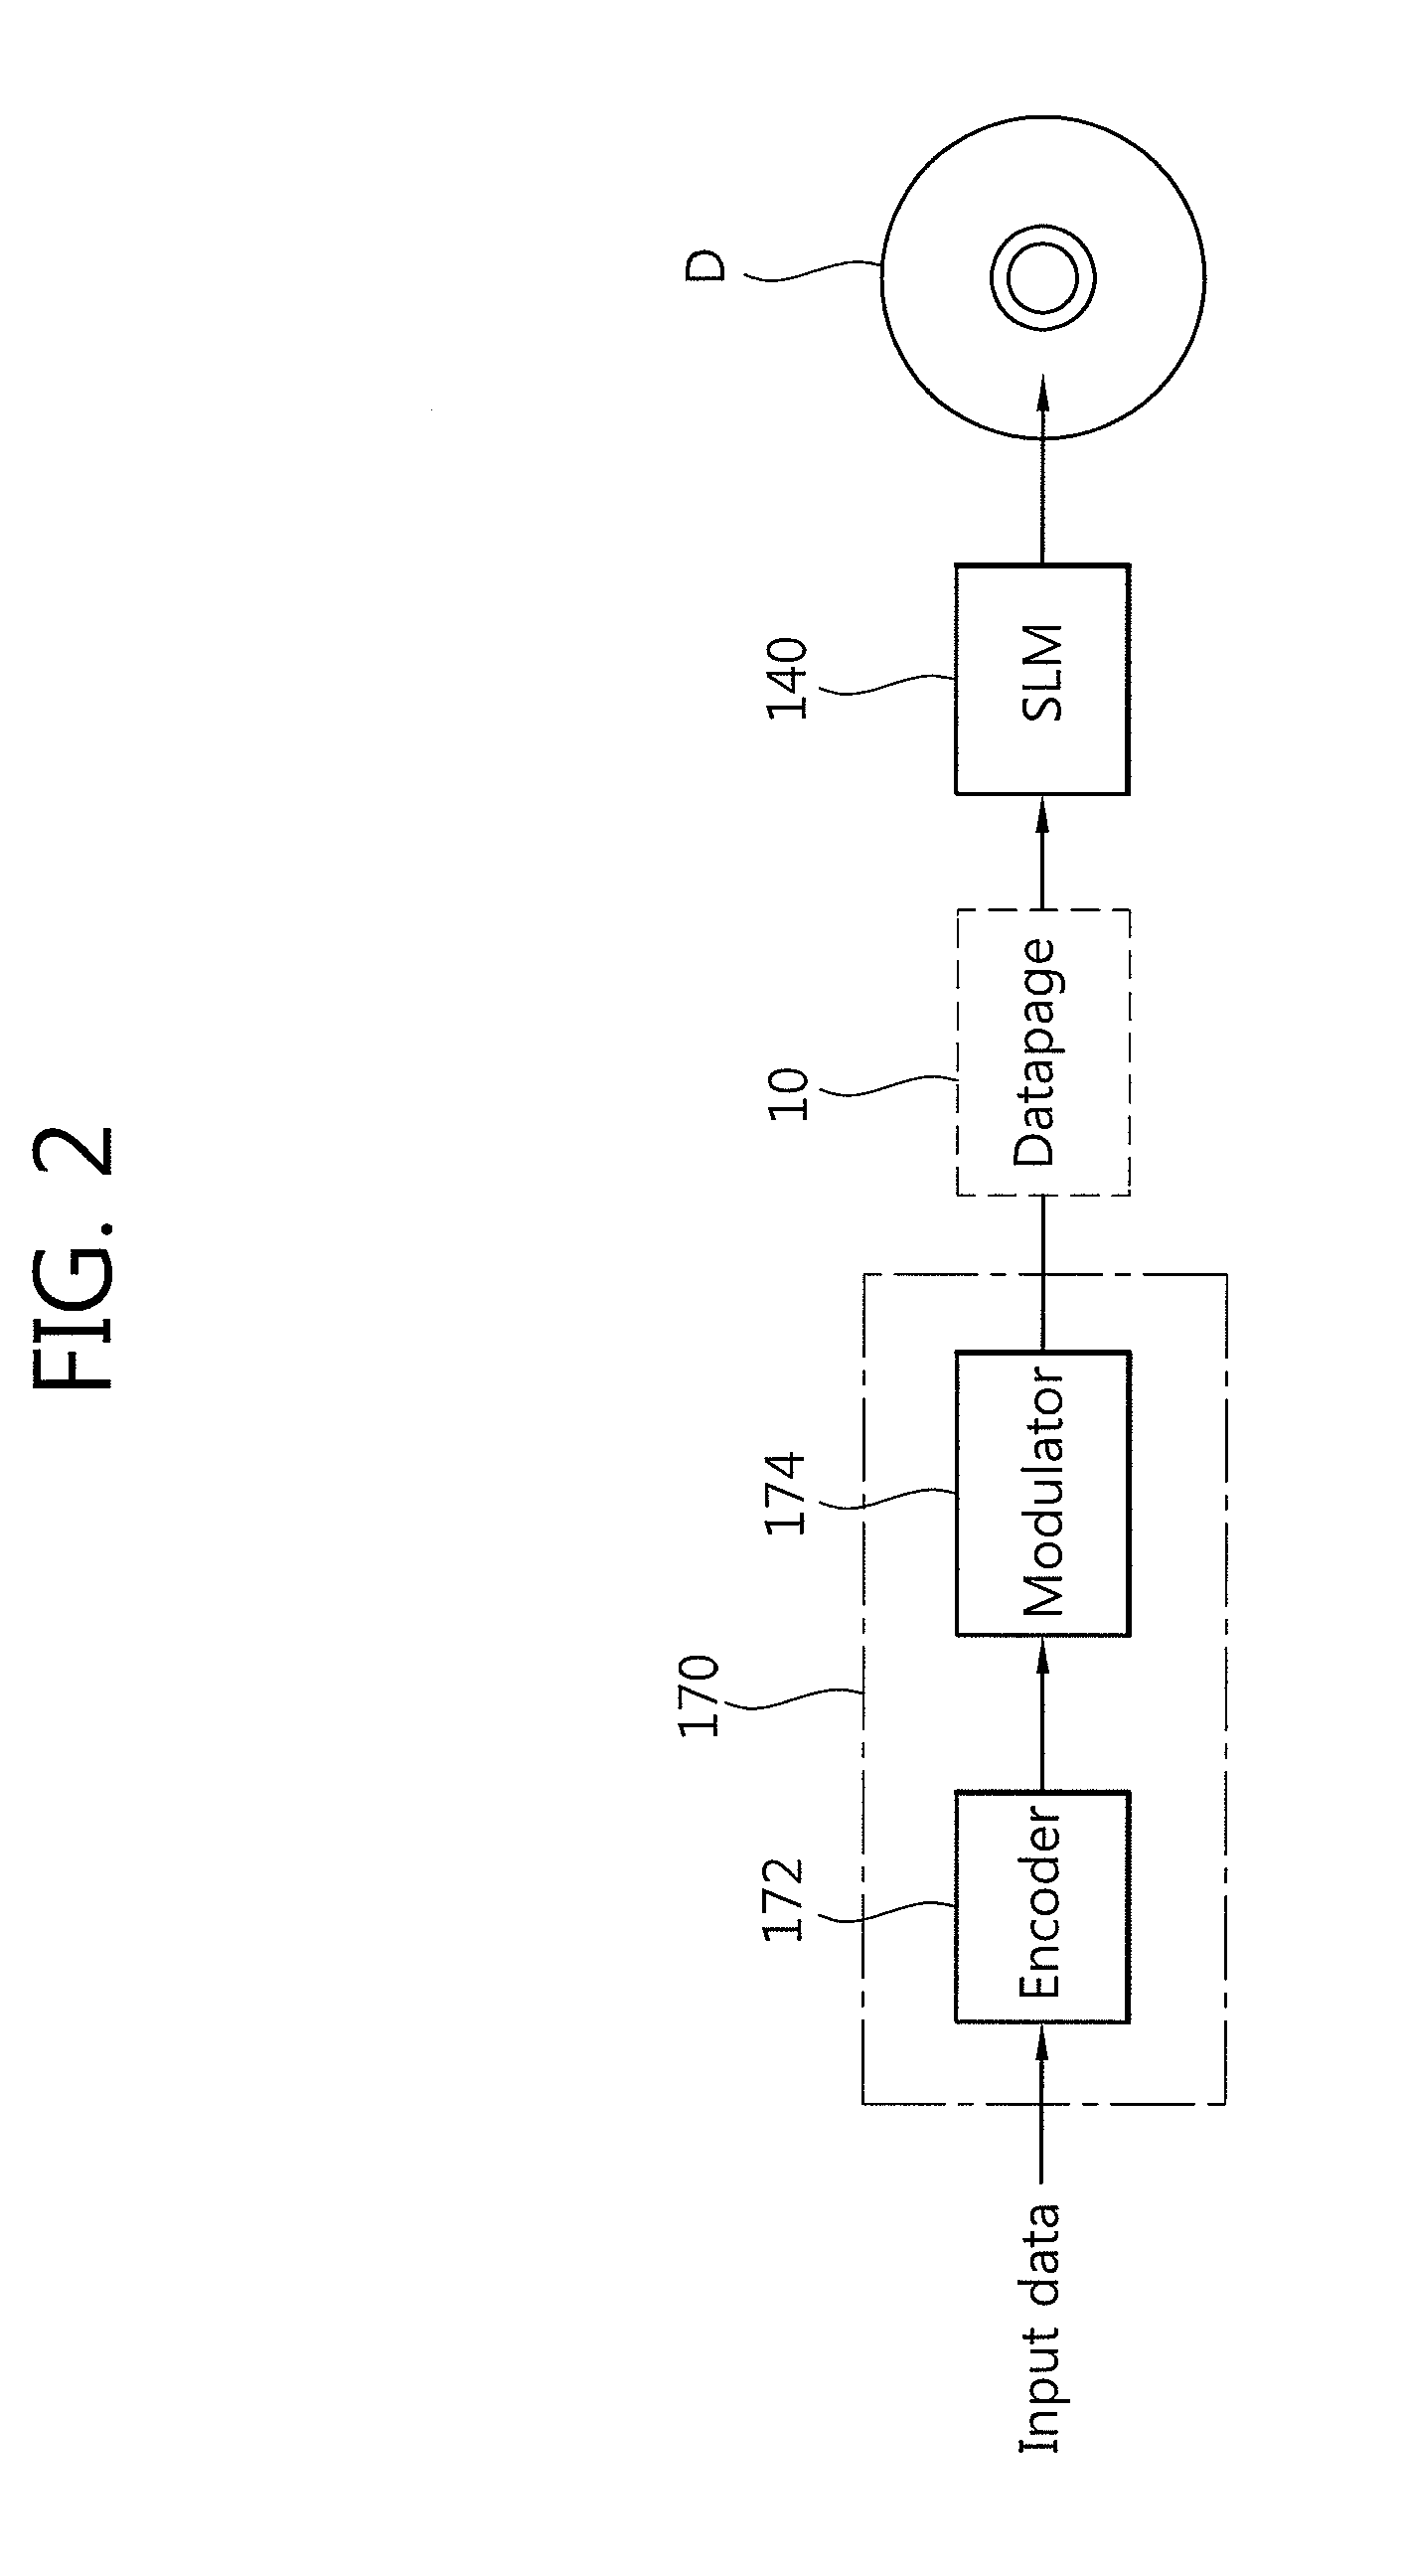 Method for detecting pattern of over-sampling image and an optical information processing apparatus and method using the same